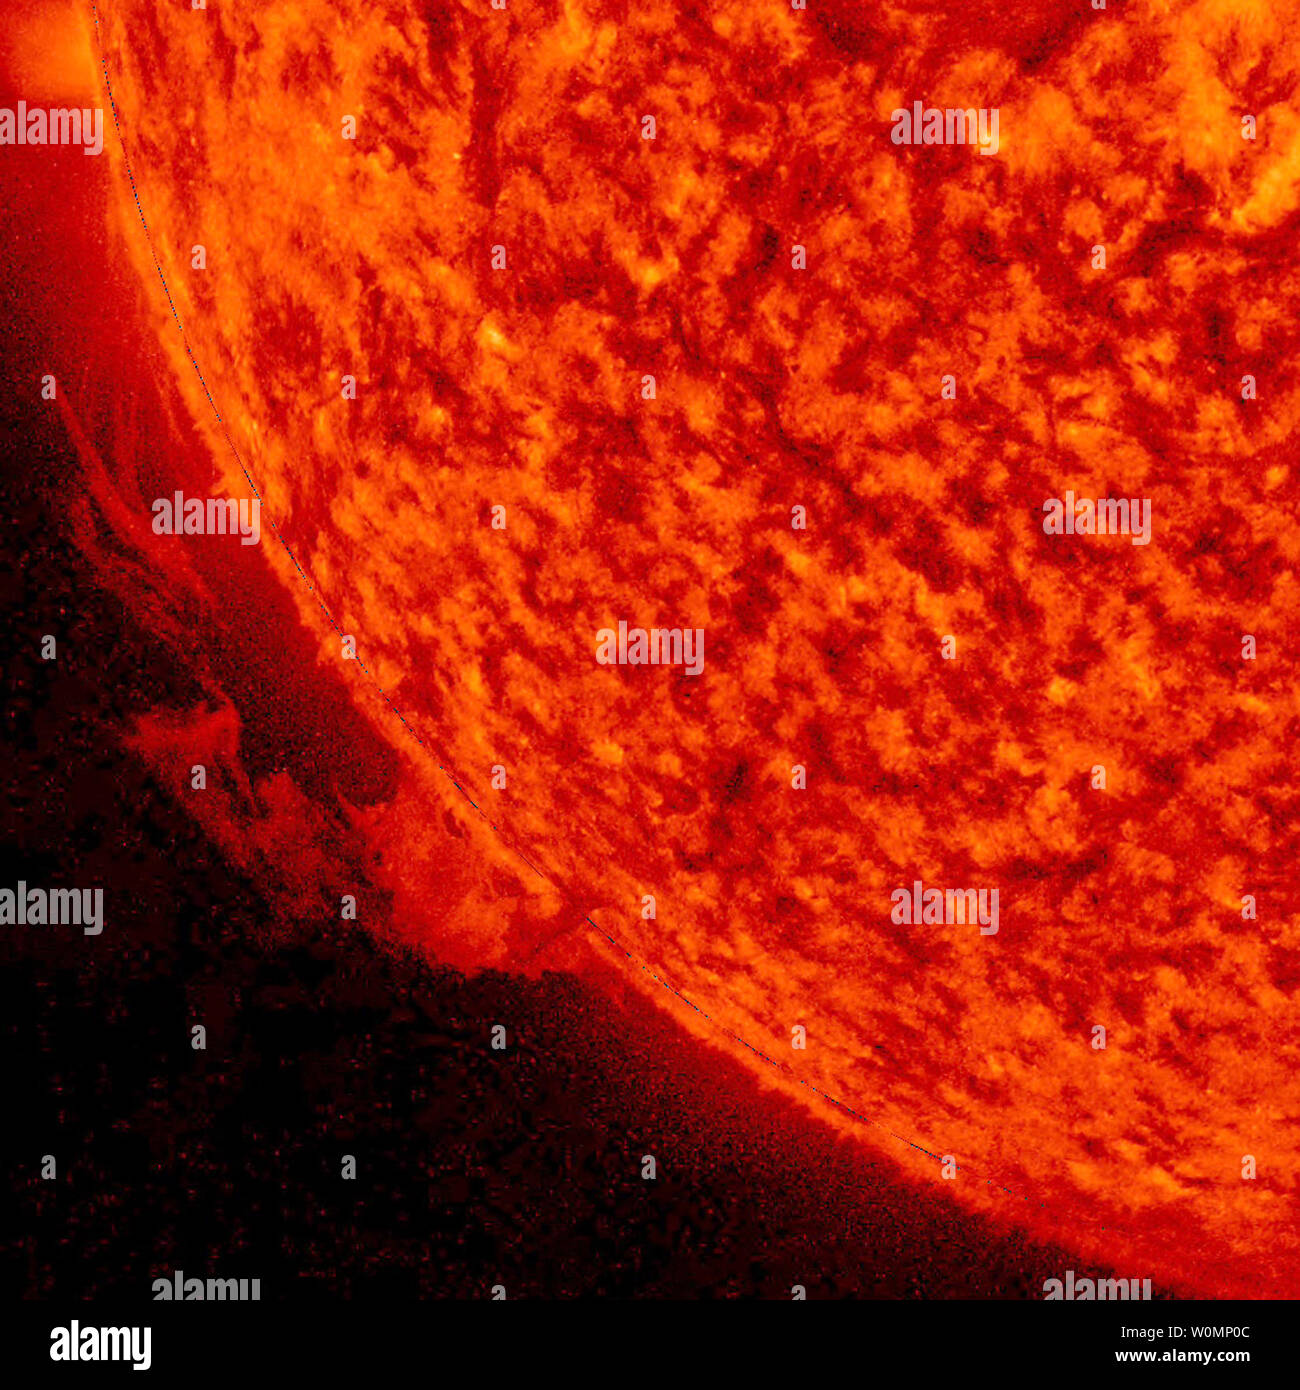 An elongated solar prominence rose up above the Sun and slowly unraveled over 17 hours on February 3, 2016. Prominences are clouds of gas suspended above the Sun by magnetic forces. You can see the plasma streaming along the magnetic field lines before it thins out and gradually breaks away from its tethers. The images were taken in a wavelength of extreme ultraviolet light. NASA/UPI Stock Photo